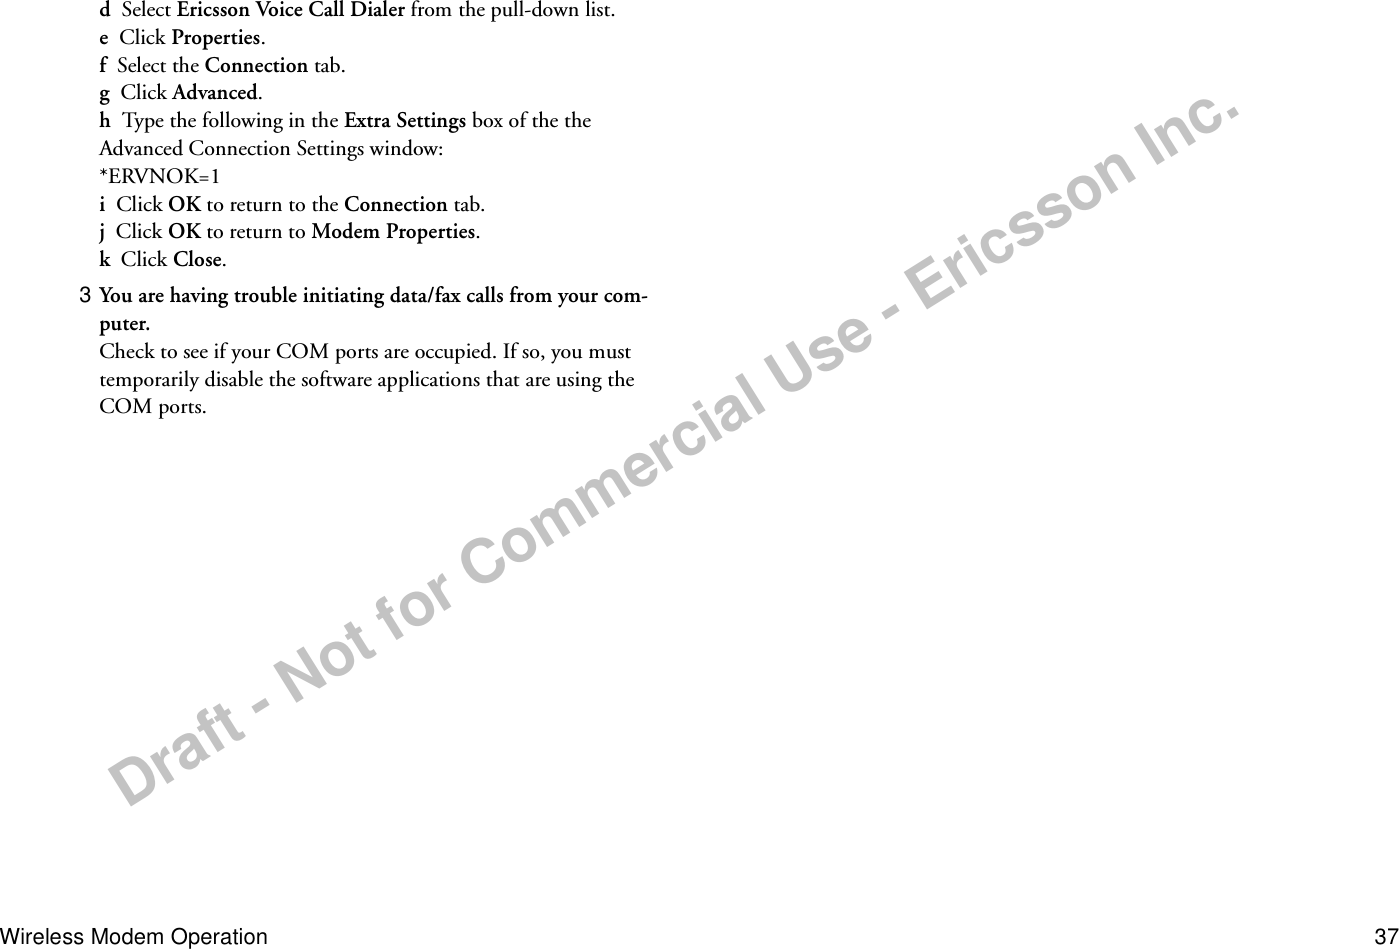 Draft - Not for Commercial Use - Ericsson Inc.Wireless Modem Operation 37d  Select Ericsson Voice Call Dialer from the pull-down list.e  Click Properties.f  Select the Connection tab.g  Click Advanced.h  Type the following in the Extra Settings box of the the Advanced Connection Settings window:*ERVNOK=1i  Click OK to return to the Connection tab.j  Click OK to return to Modem Properties.k  Click Close.3 You are having trouble initiating data/fax calls from your com-puter.Check to see if your COM ports are occupied. If so, you must temporarily disable the software applications that are using the COM ports.